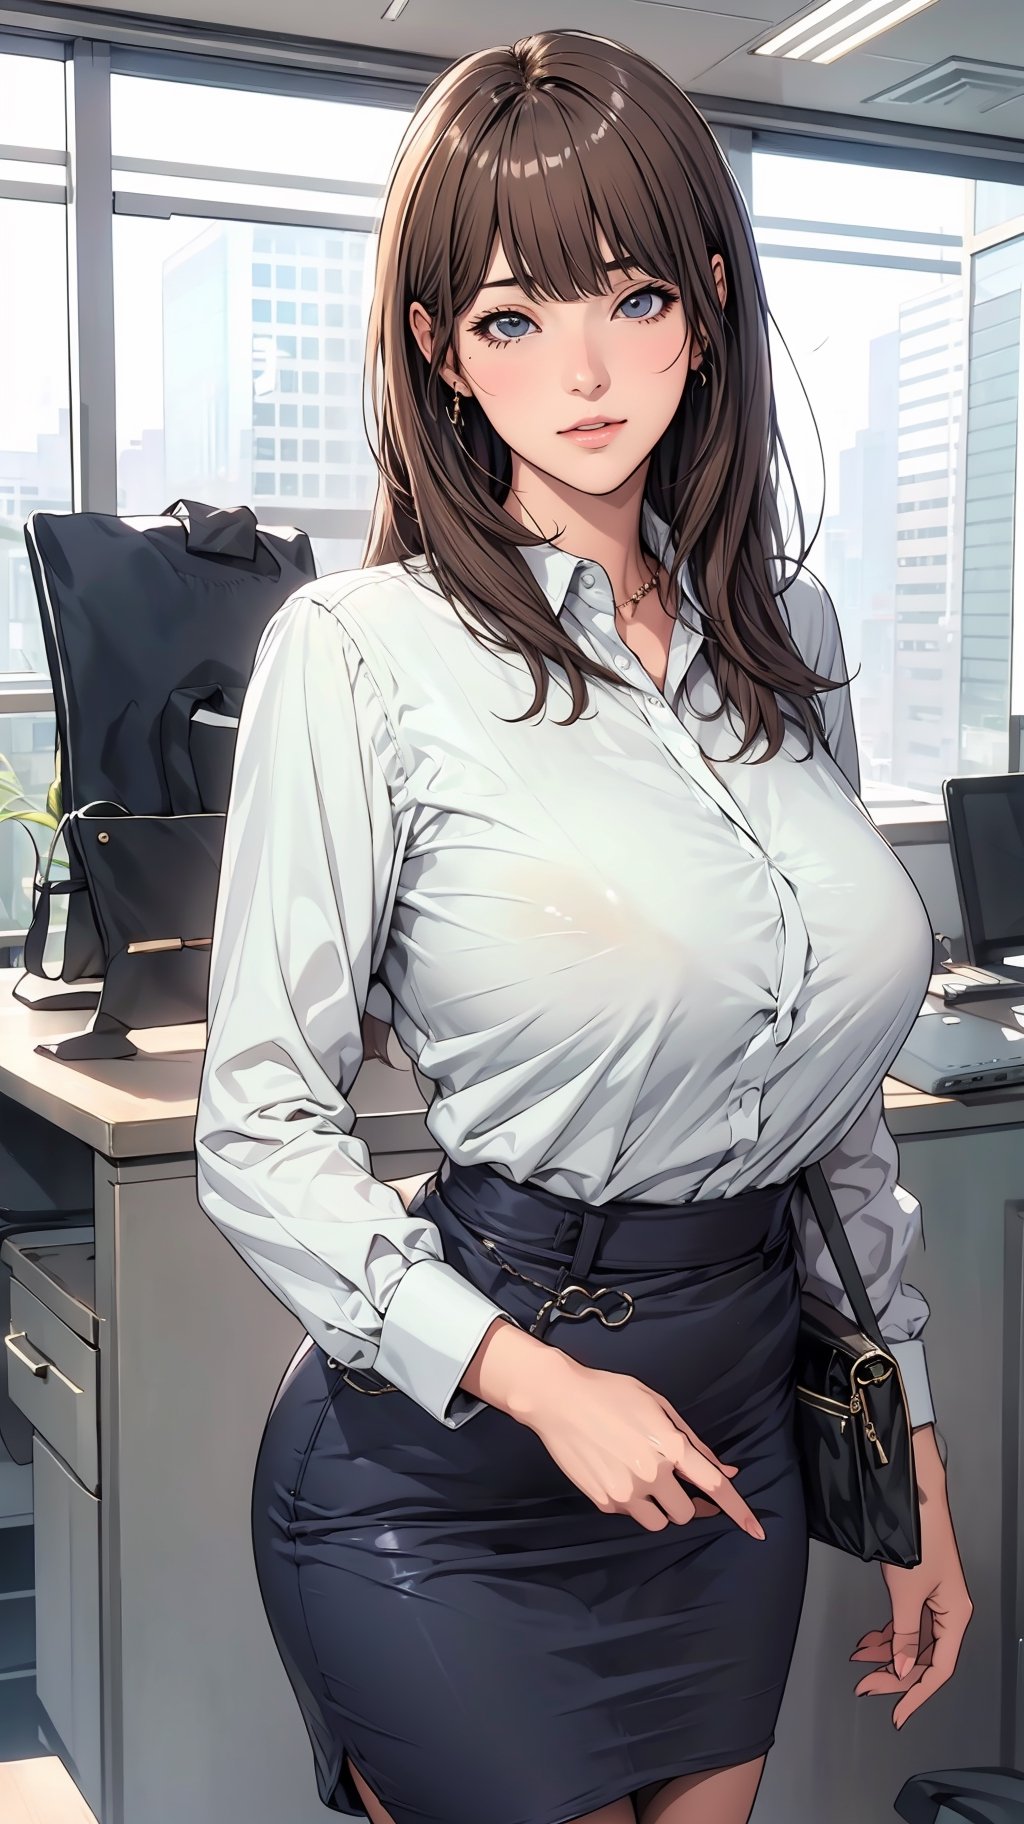 1 anime girl, (big breasts 1.5), (long brown hair, bangs: 1.2), slightly plump figure, wearing a white shirt, gray and black skirt, sexy OL, handbag, office background,High detailed 